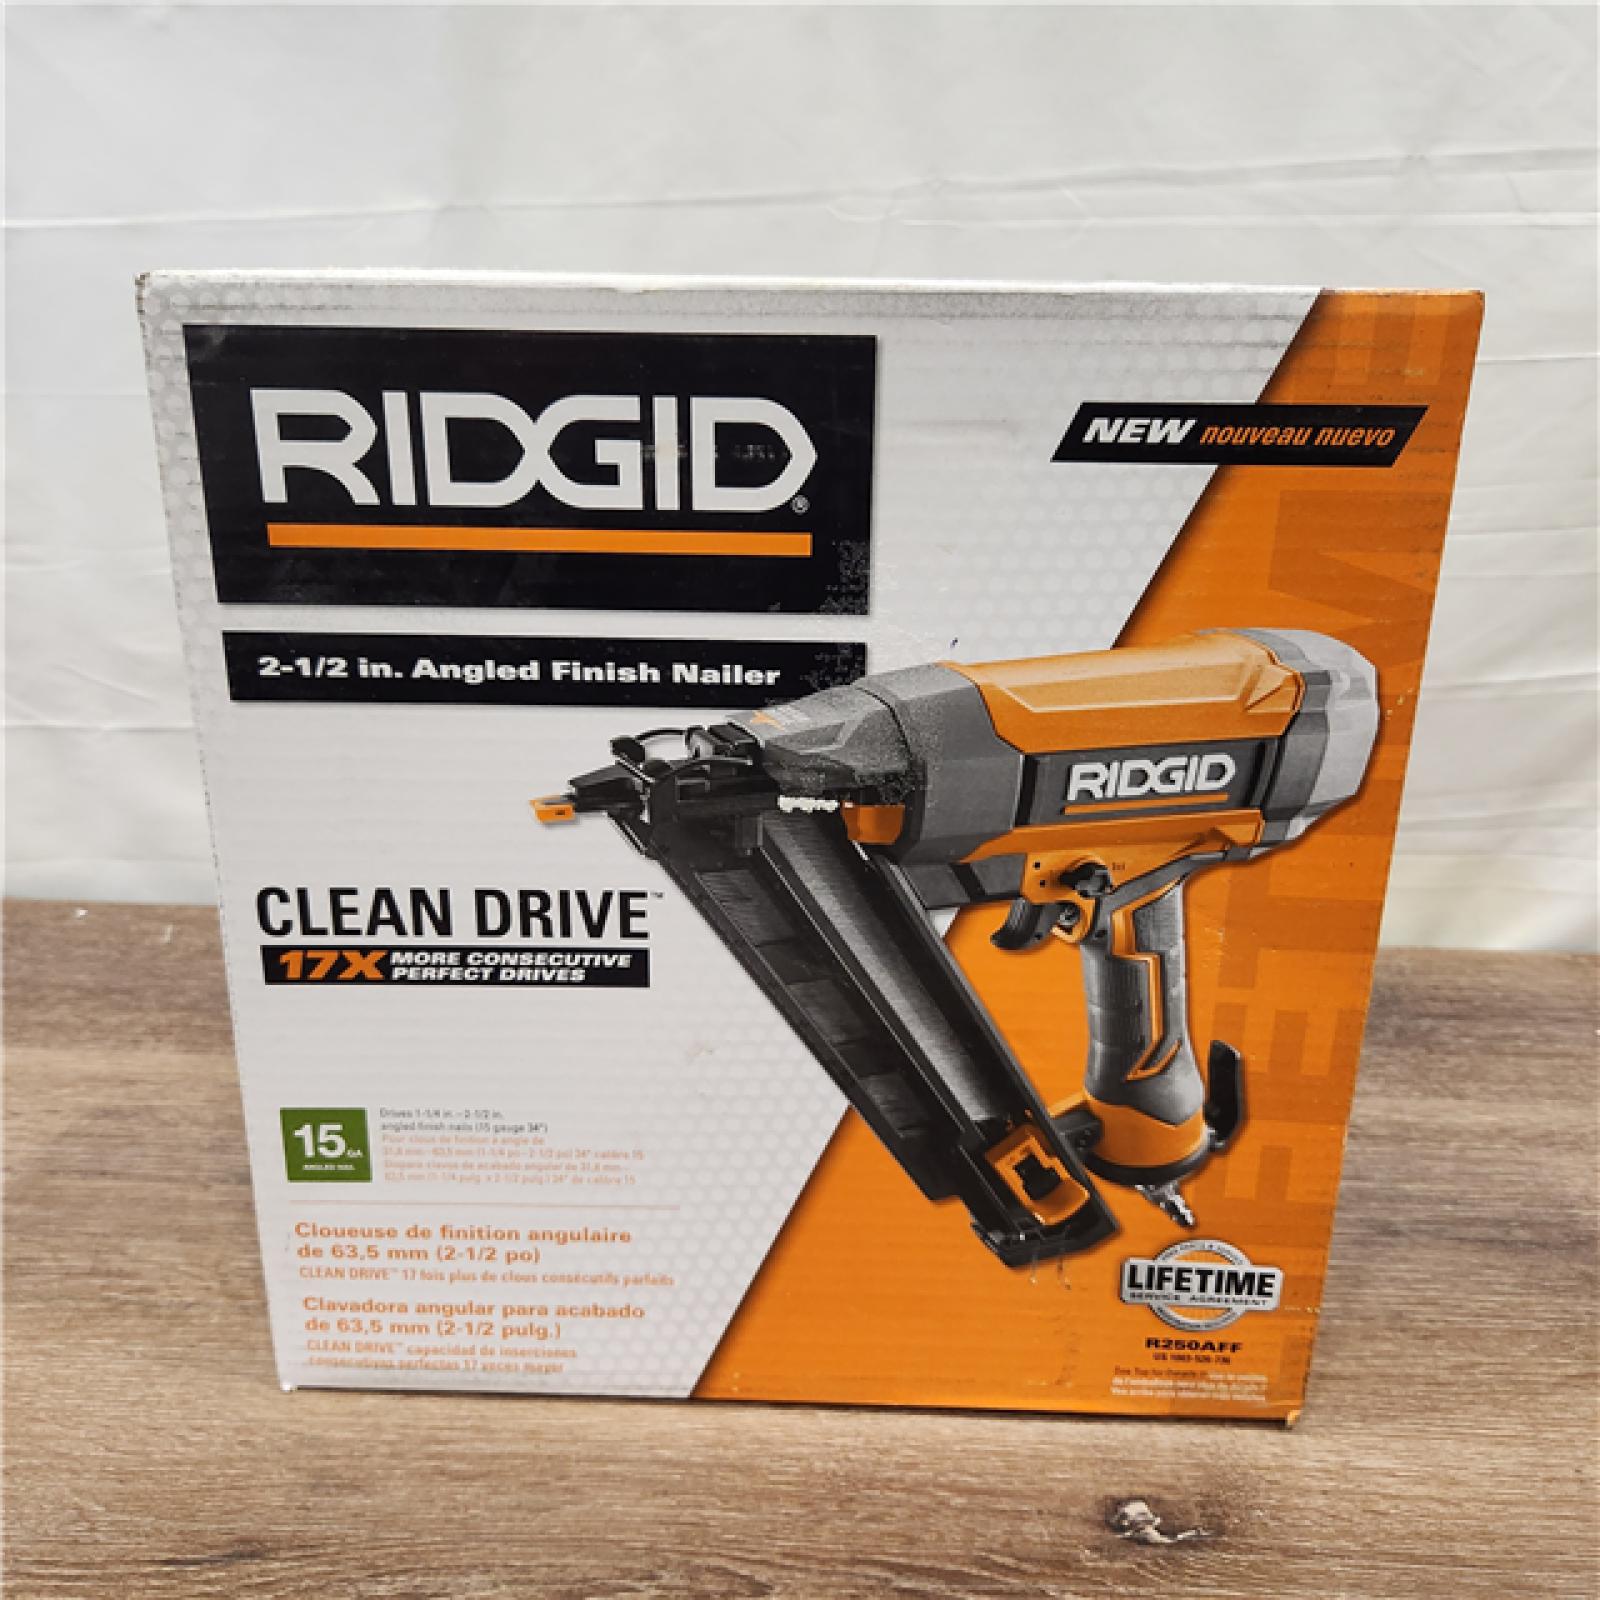 AS-IS Ridgid 15-Gauge 2-1/2 in. Angled Finish Nailer with CLEAN DRIVE Technology, Tool Bag and Sample Nails